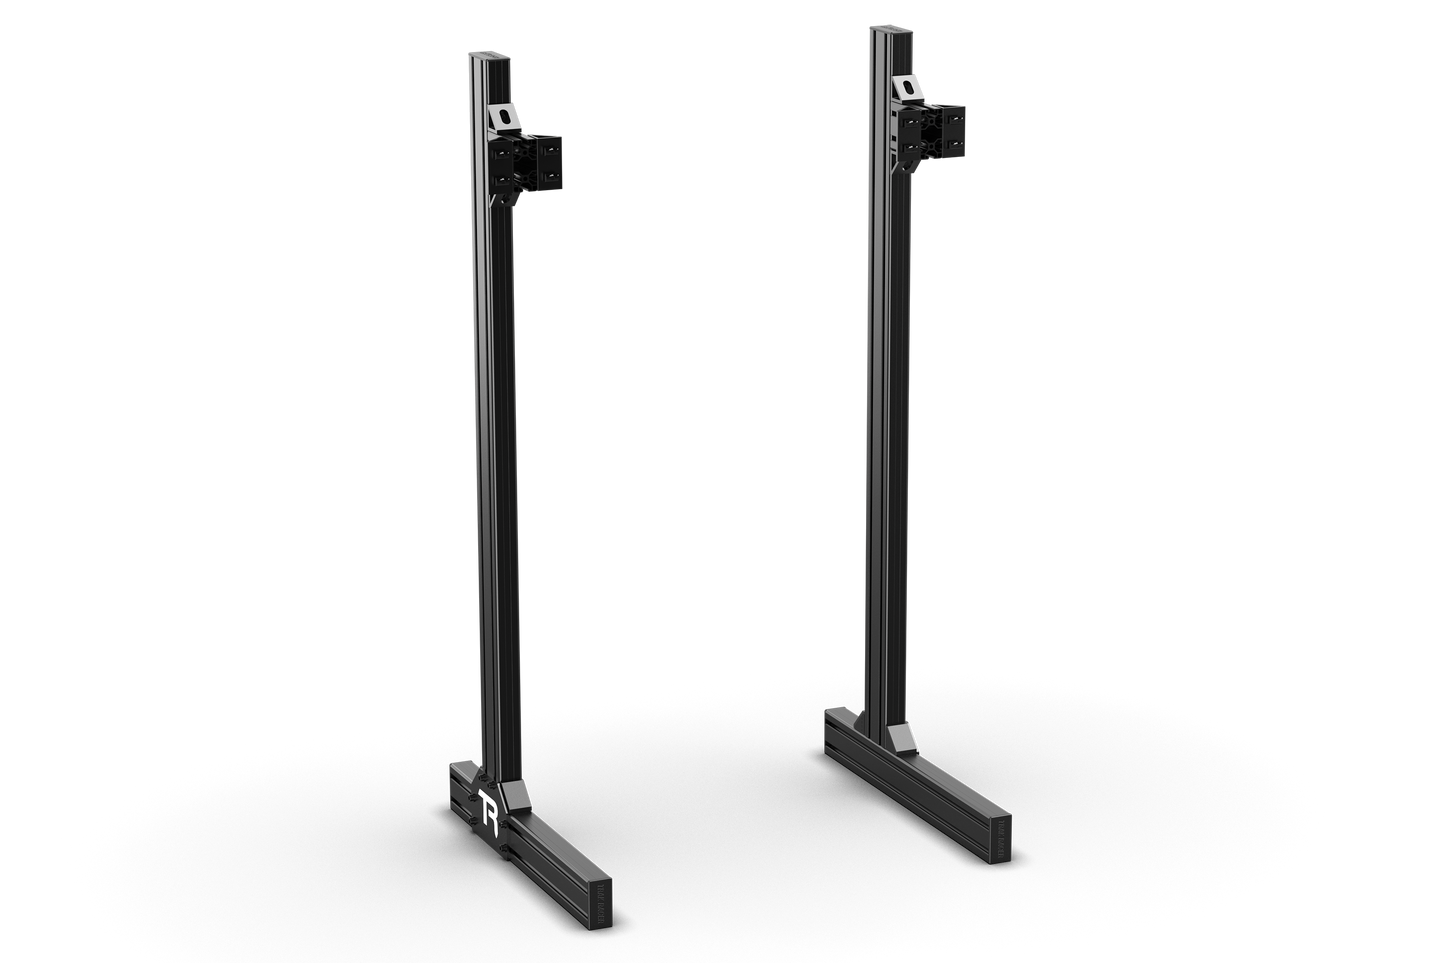 Trak Racer Legs for Floor monitor stand for TR8020 Monitor Stand – Black